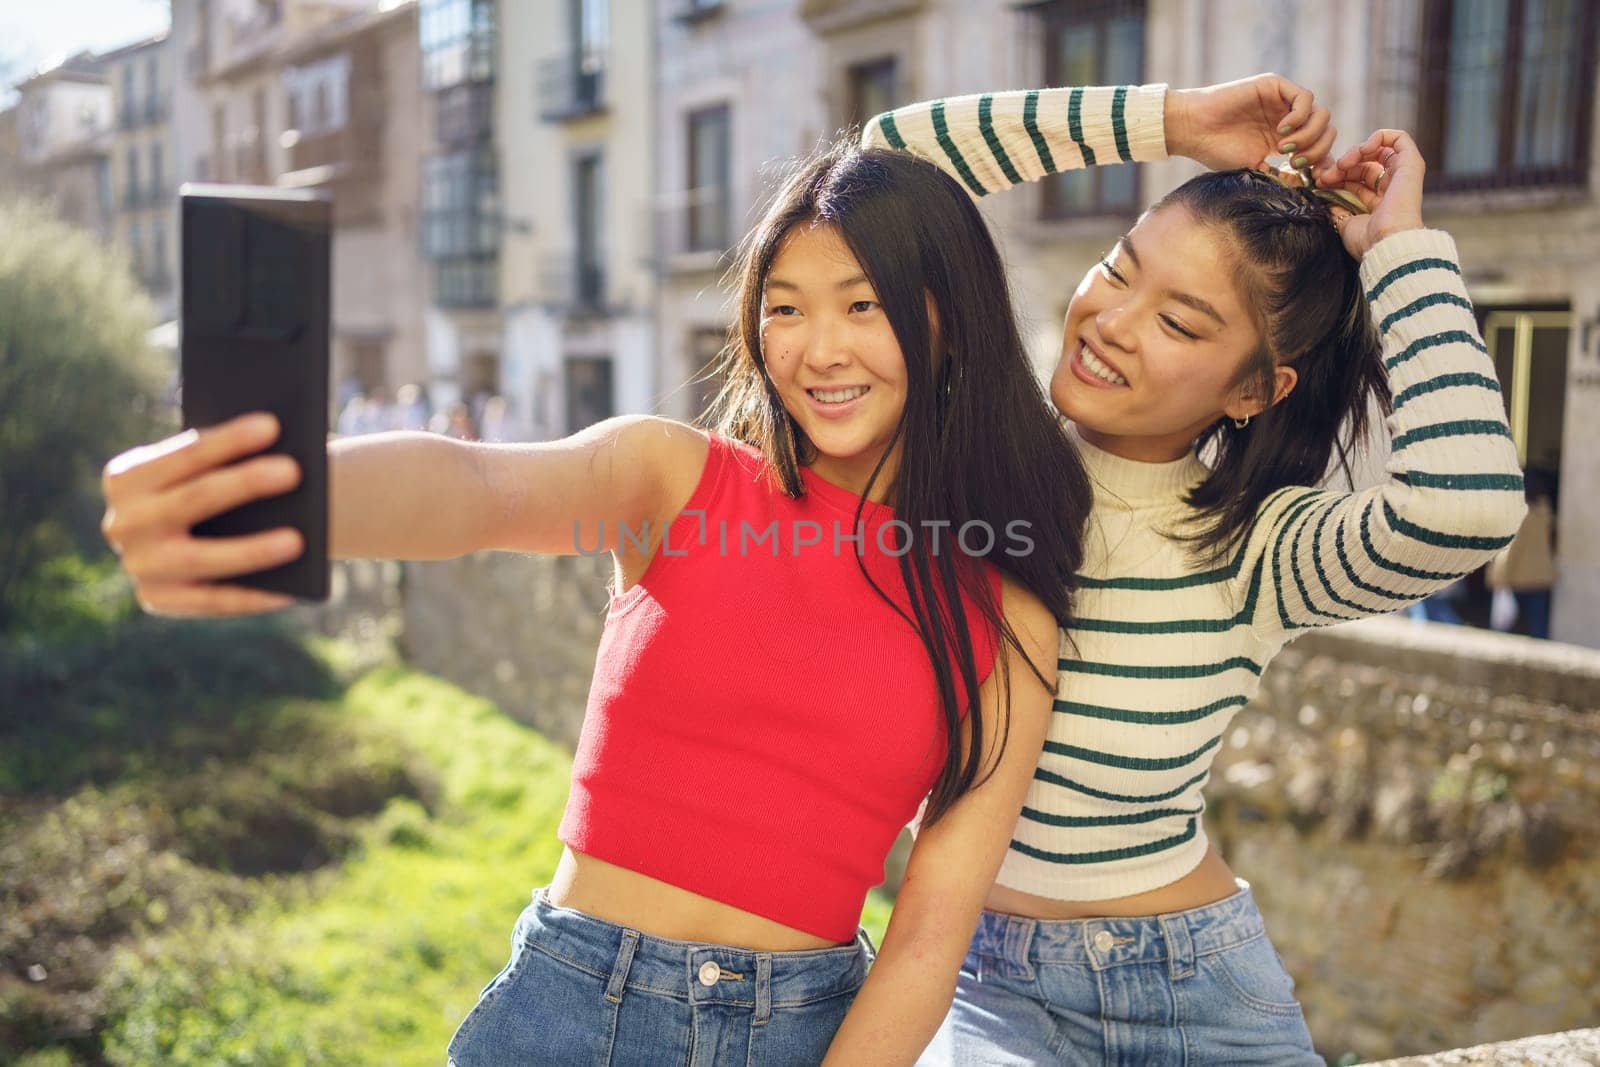 Young ethnic Asian girlfriends smiling happily while making selfie on cellphone together against city buildings in Granada